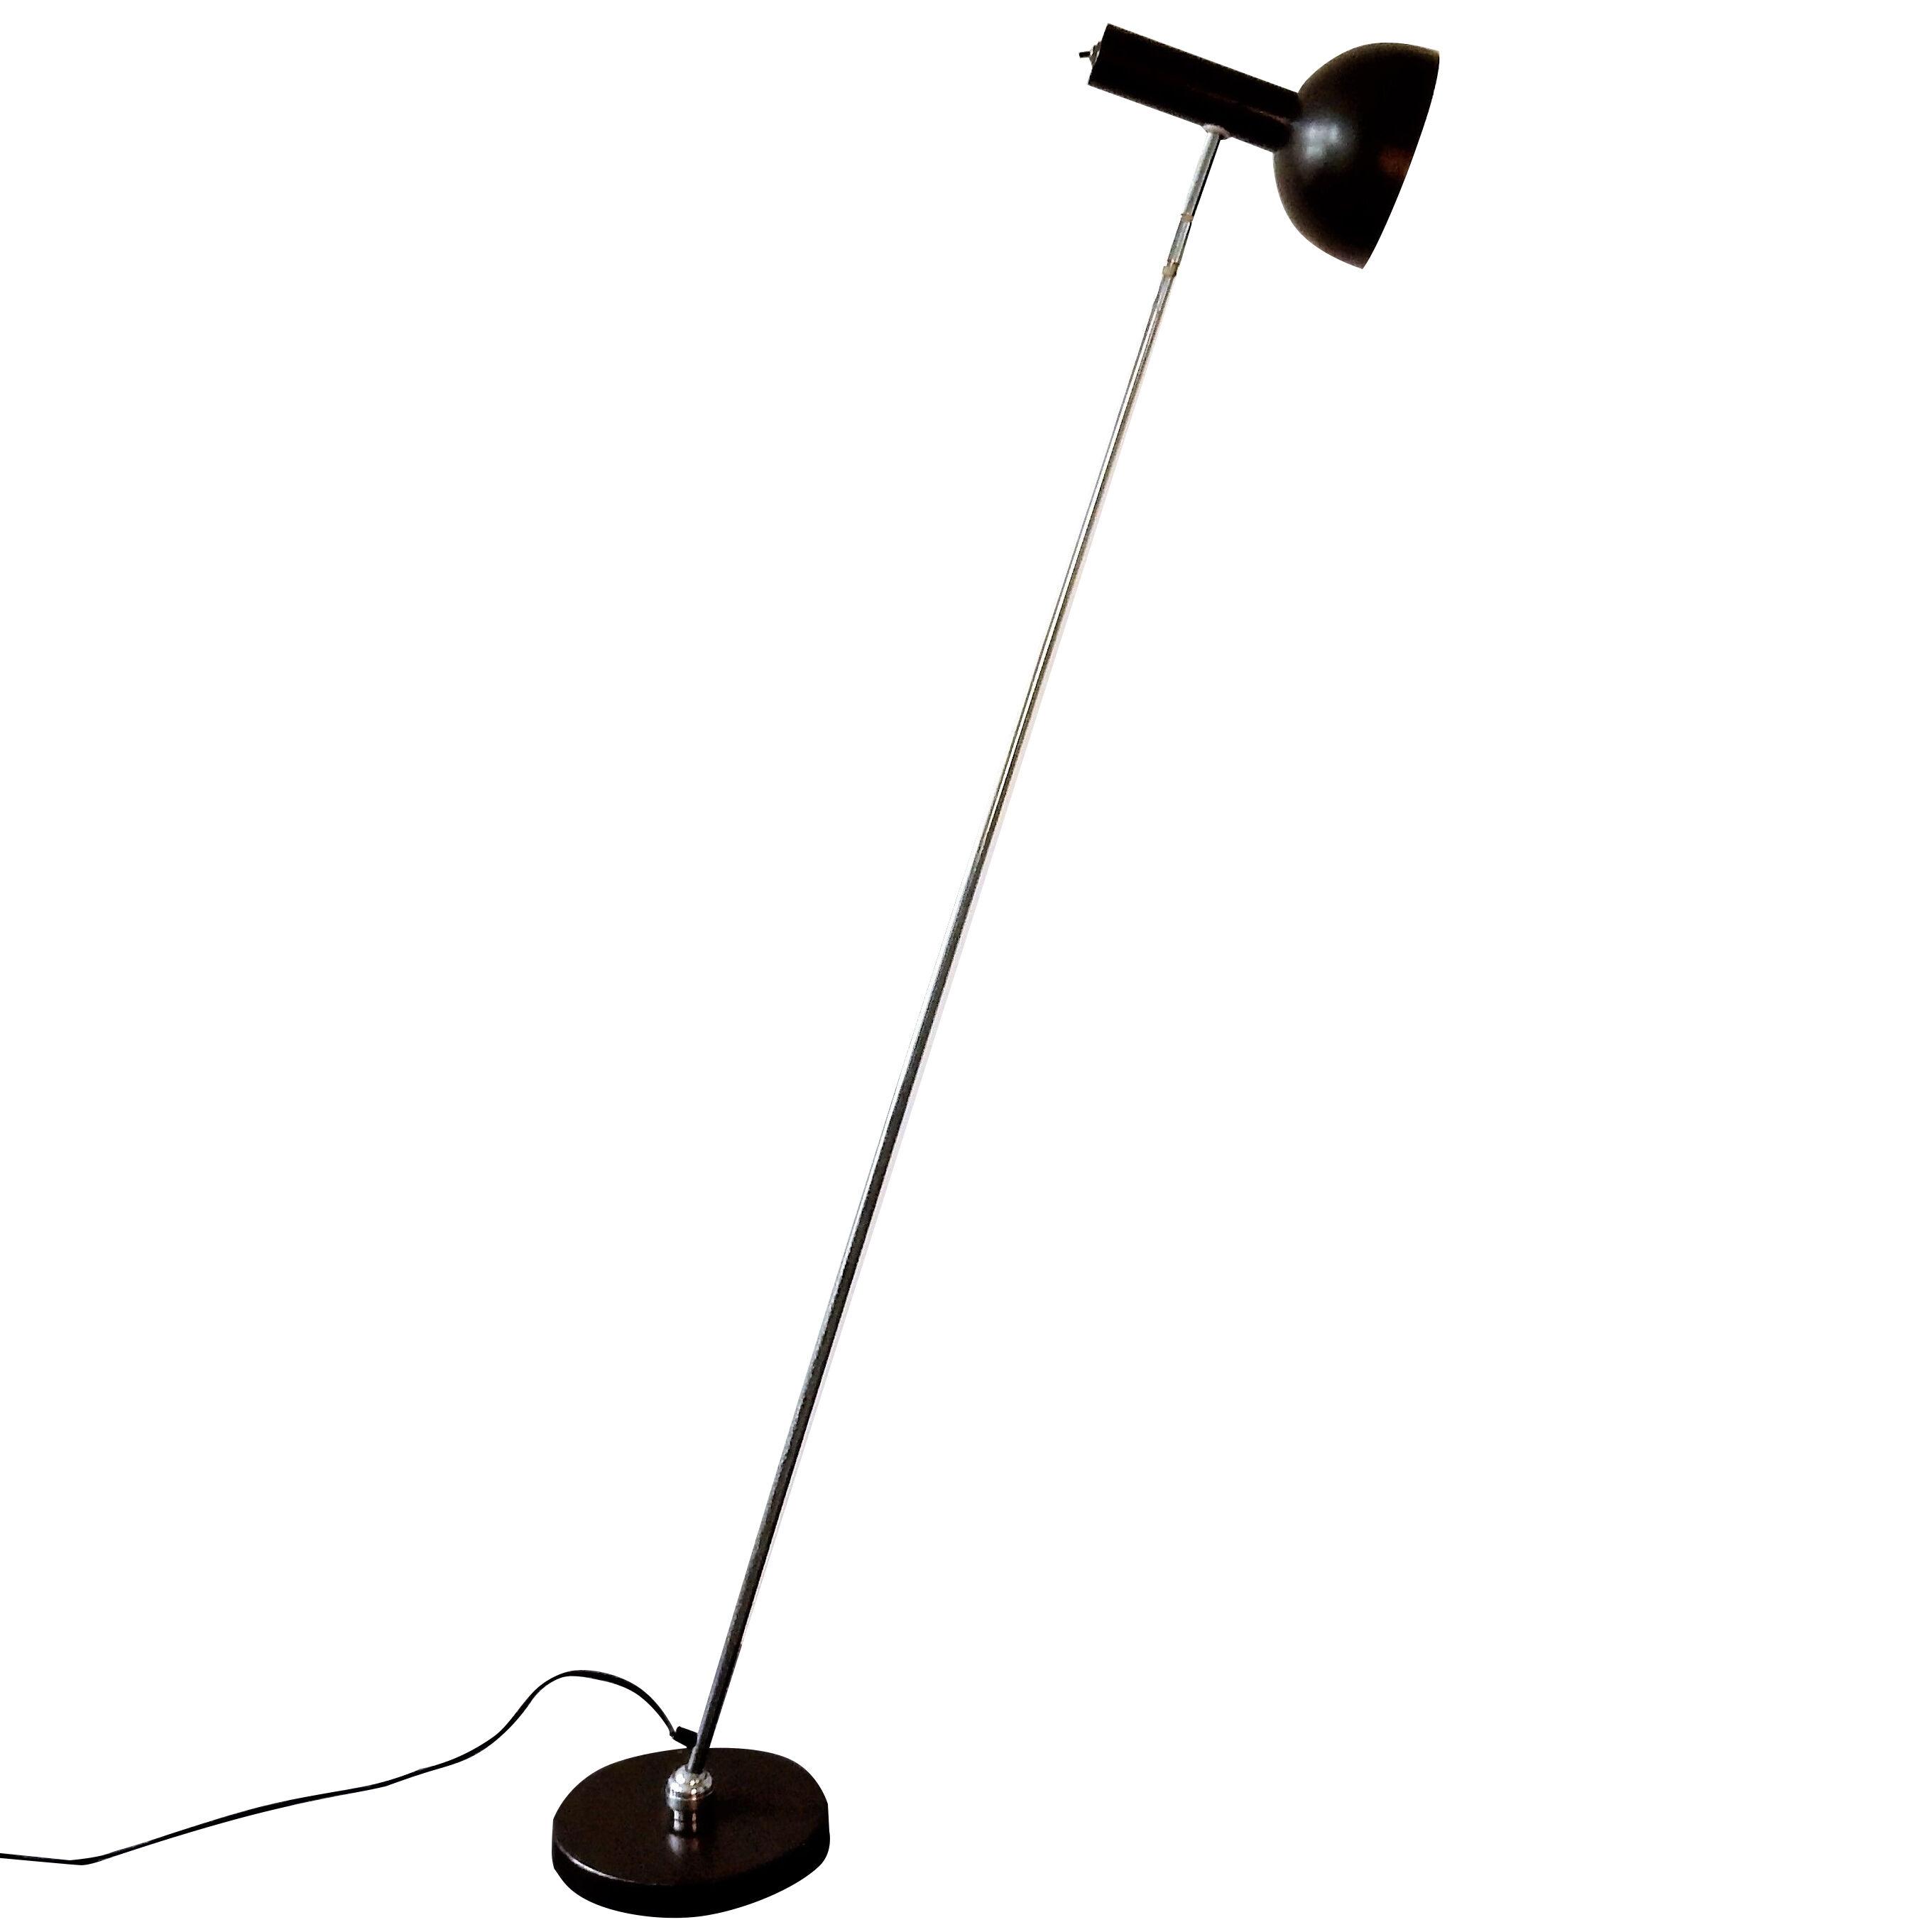 ‘Ball in socket’ floor lamp by H. Busquet for Hala Zeist, The Netherlands 1960’s